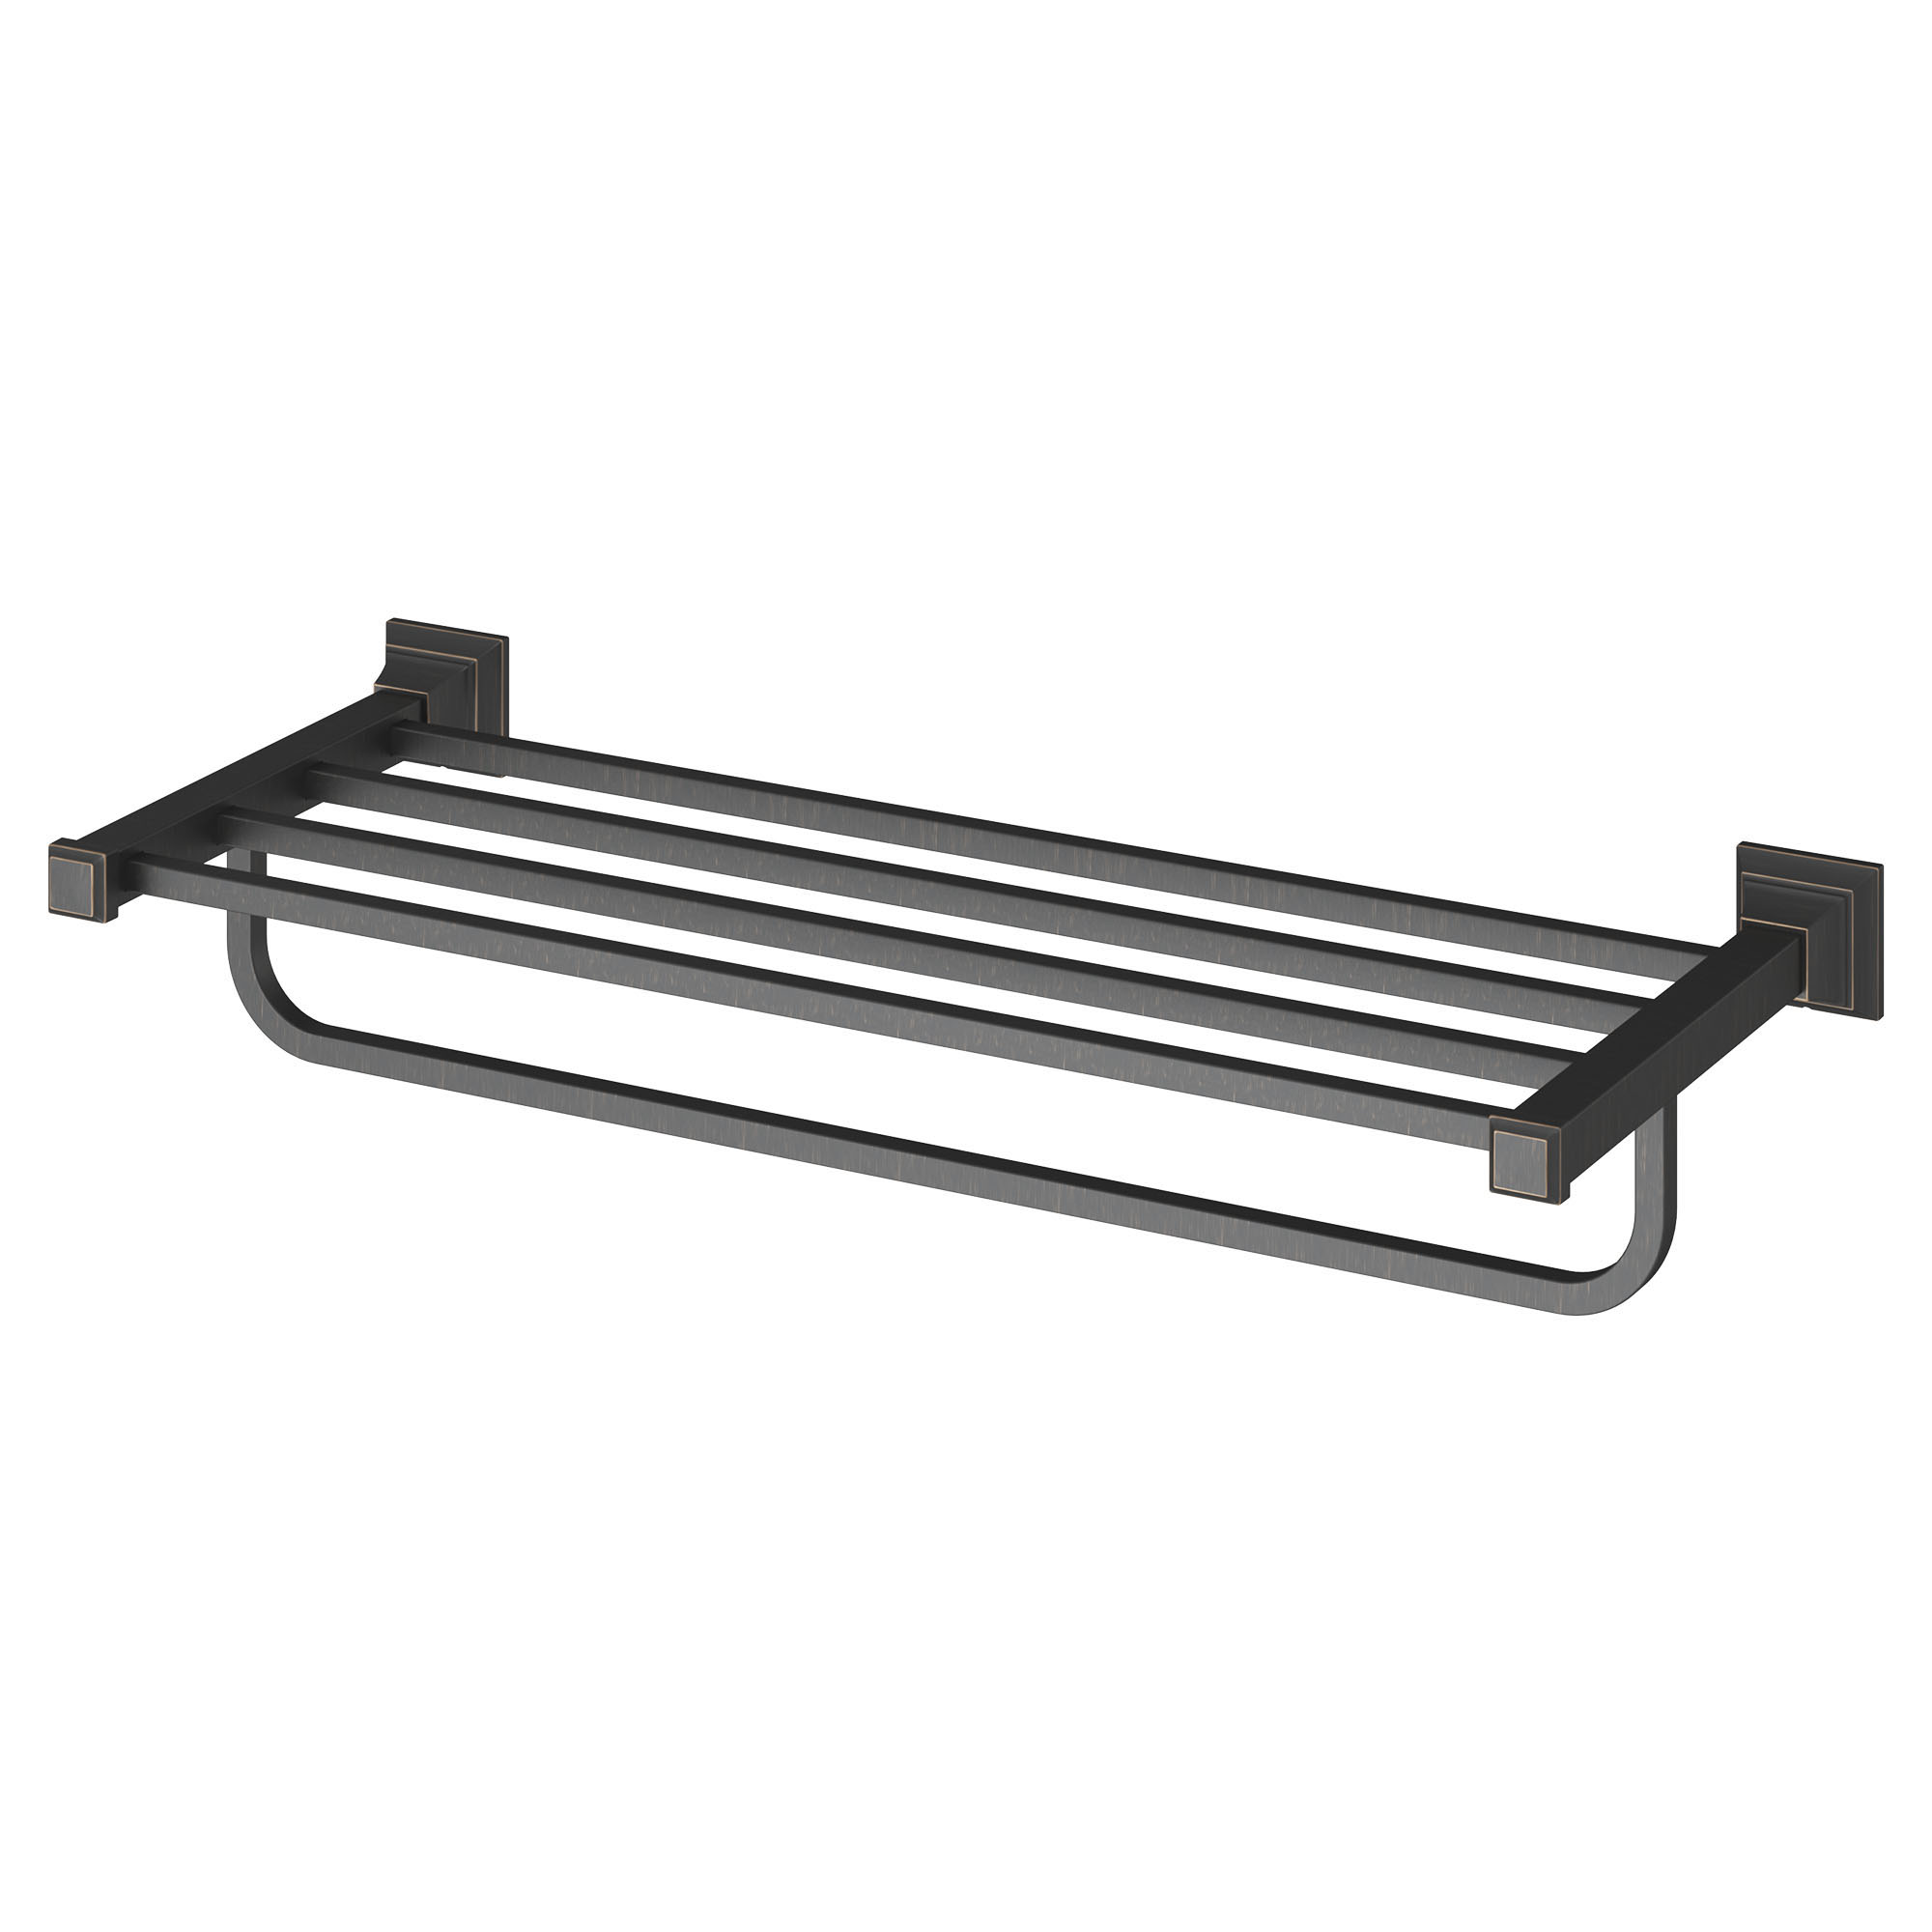 Town Square™ S 24-Inch Train Rack